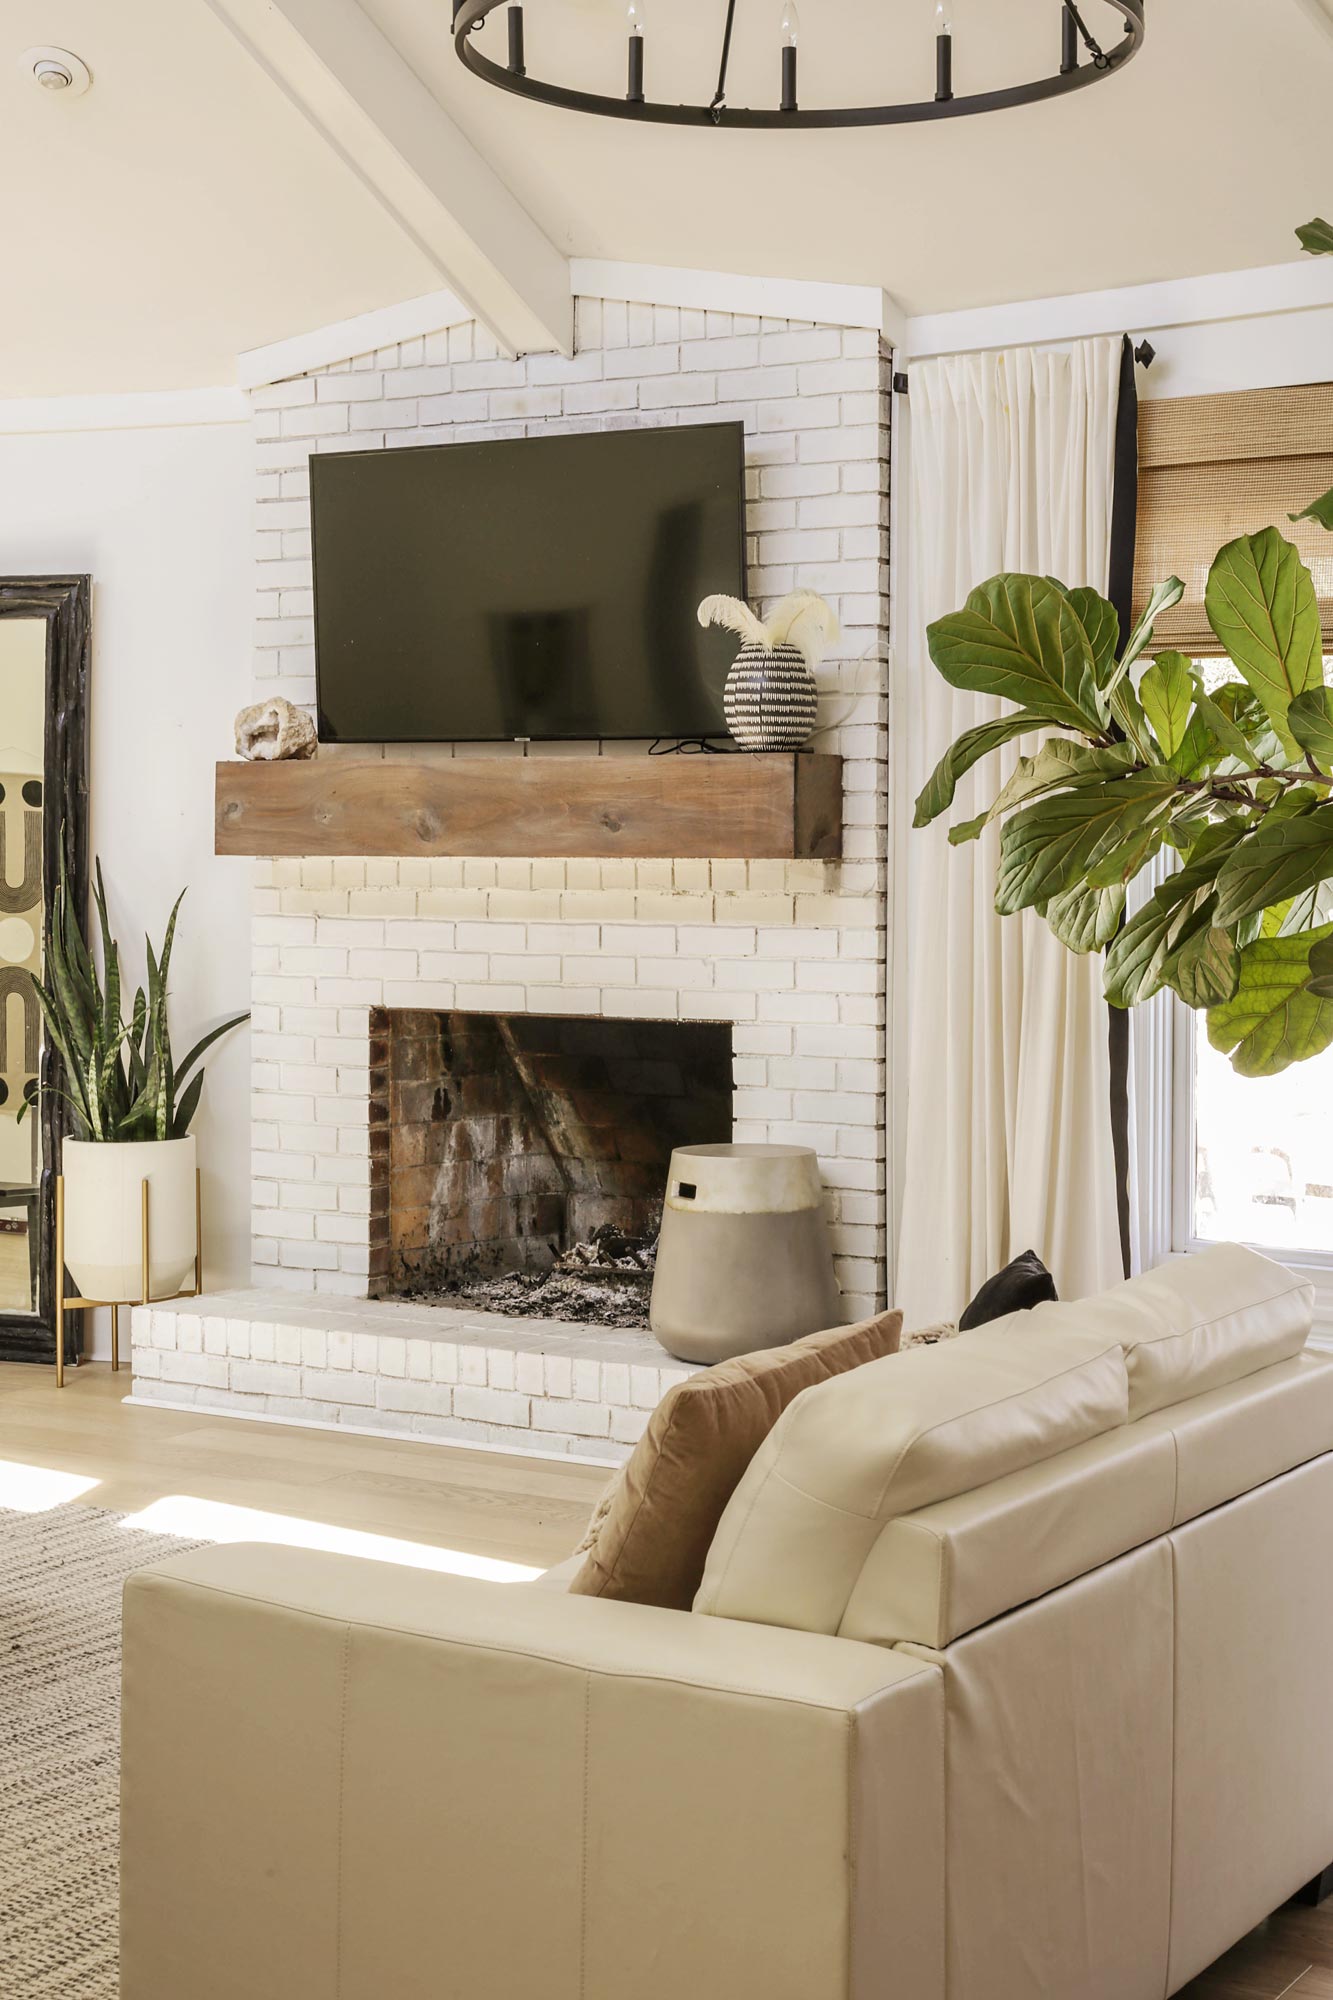 Wood Beam Mantel Diy For Under 30, How To Get Mantel Of Fireplace